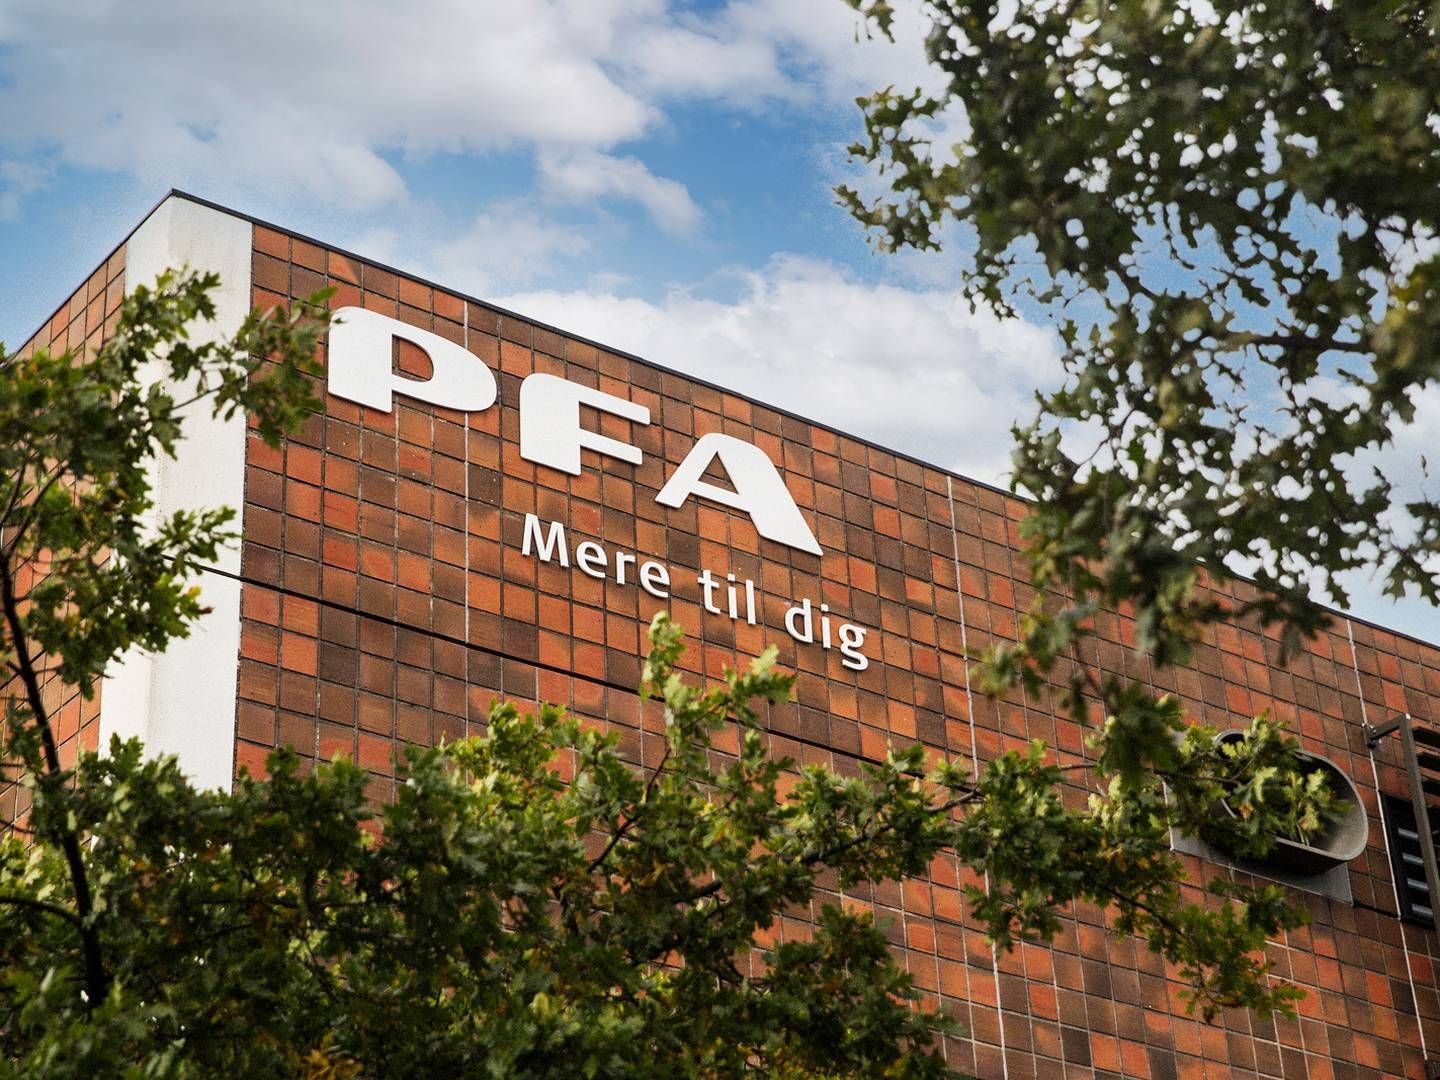 Head of Media Relations at PFA tells Danish business media Børsen that the fund has complete faith in TDC's strategy and expects the investment to yield a stable, long-term return. | Photo: Pr / Pfa